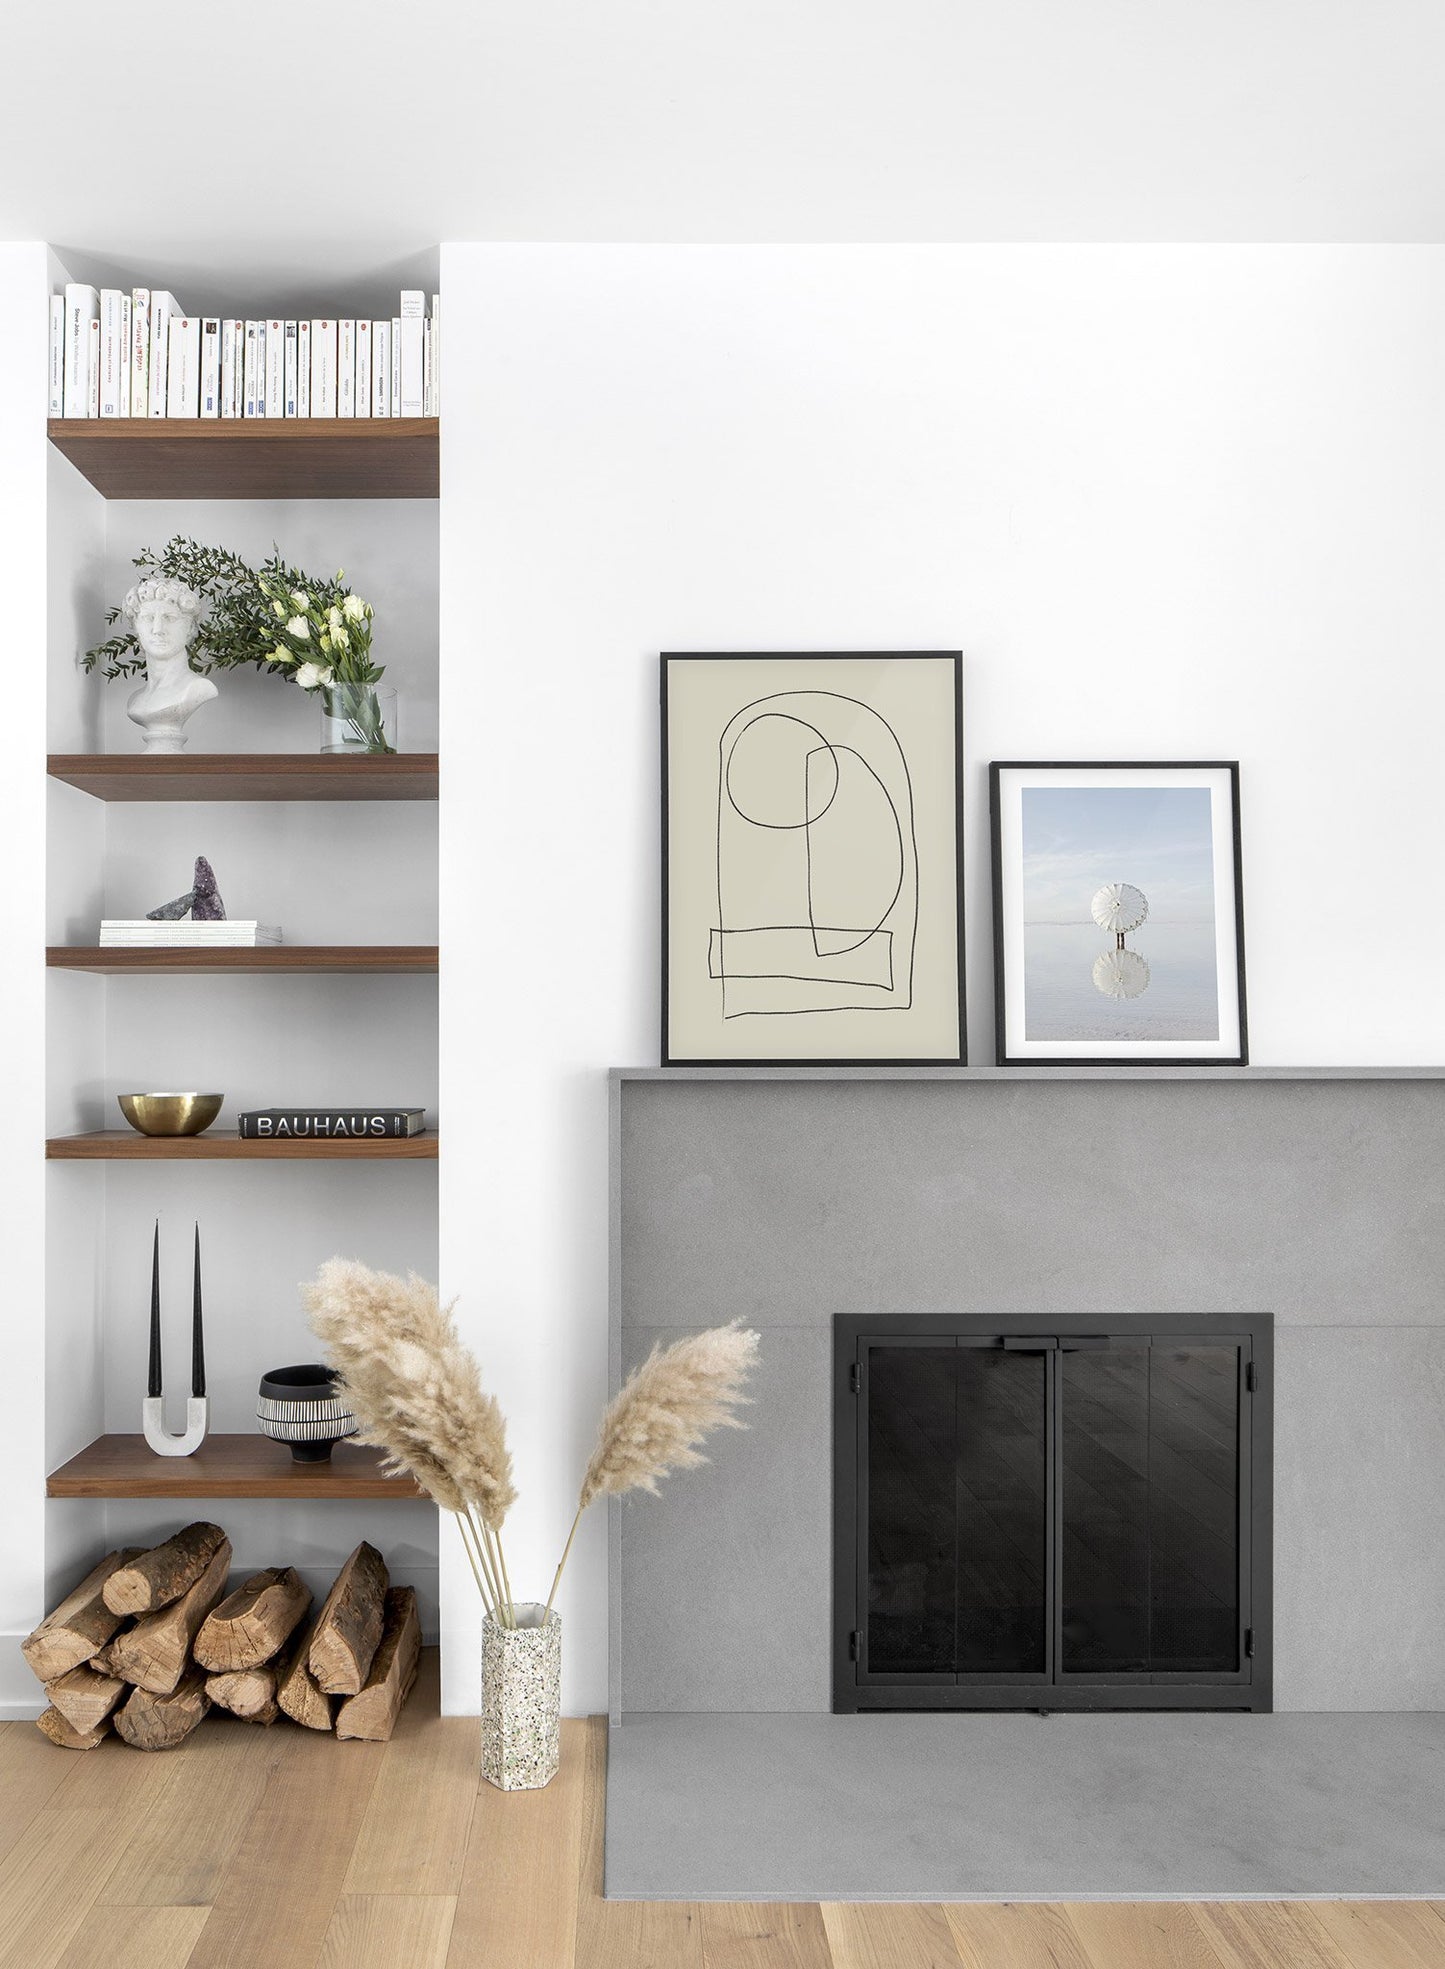 Modern minimalist poster by Opposite Wall with abstract design of Anxious by Toffie Affichiste - Gallery Wall Duo - Dining Room